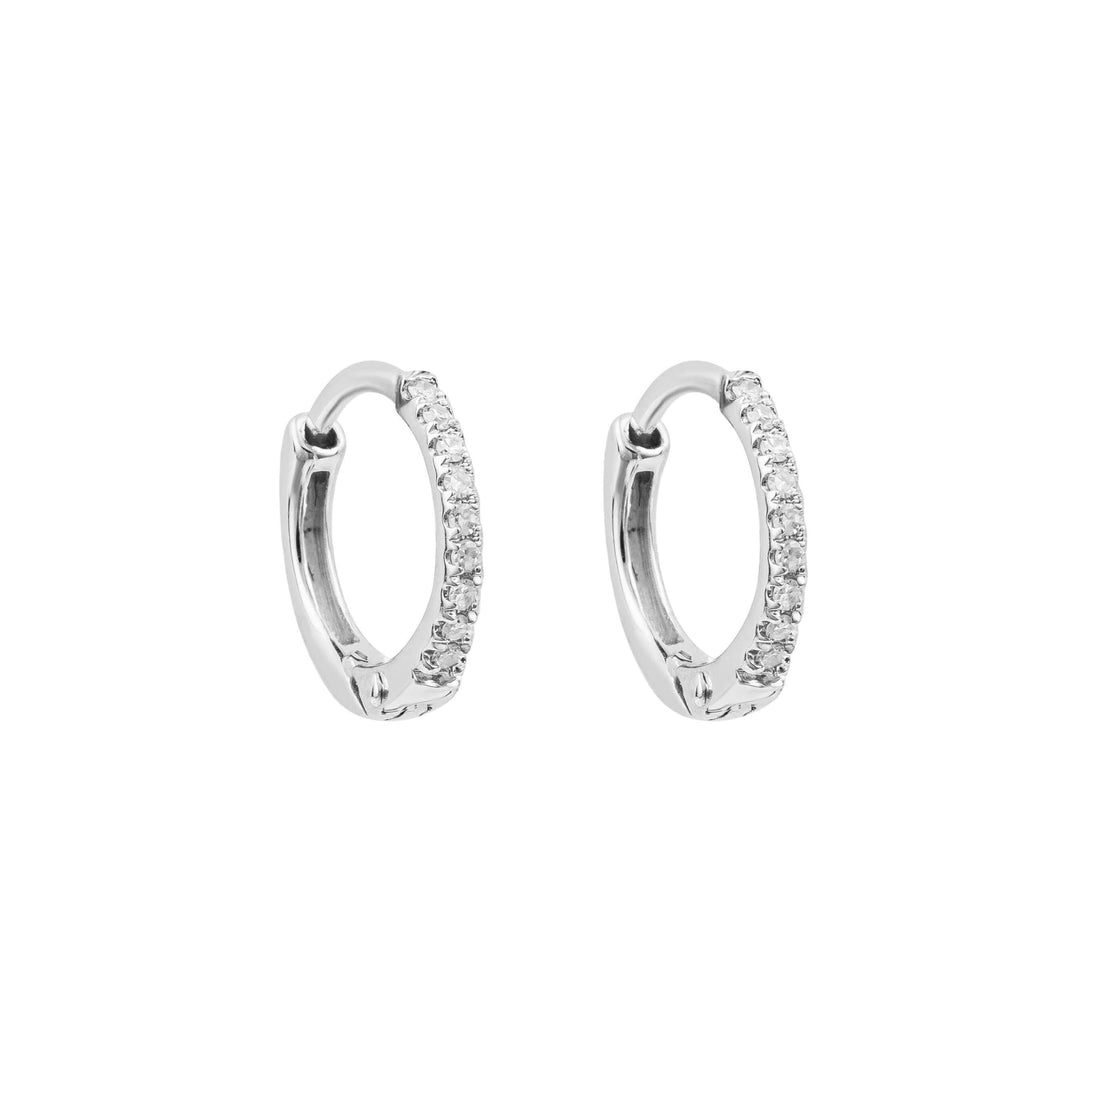 Hoop Earrings with Pave Diamonds in 9ct White Gold - Robert Anthony Jewellers, Edinburgh